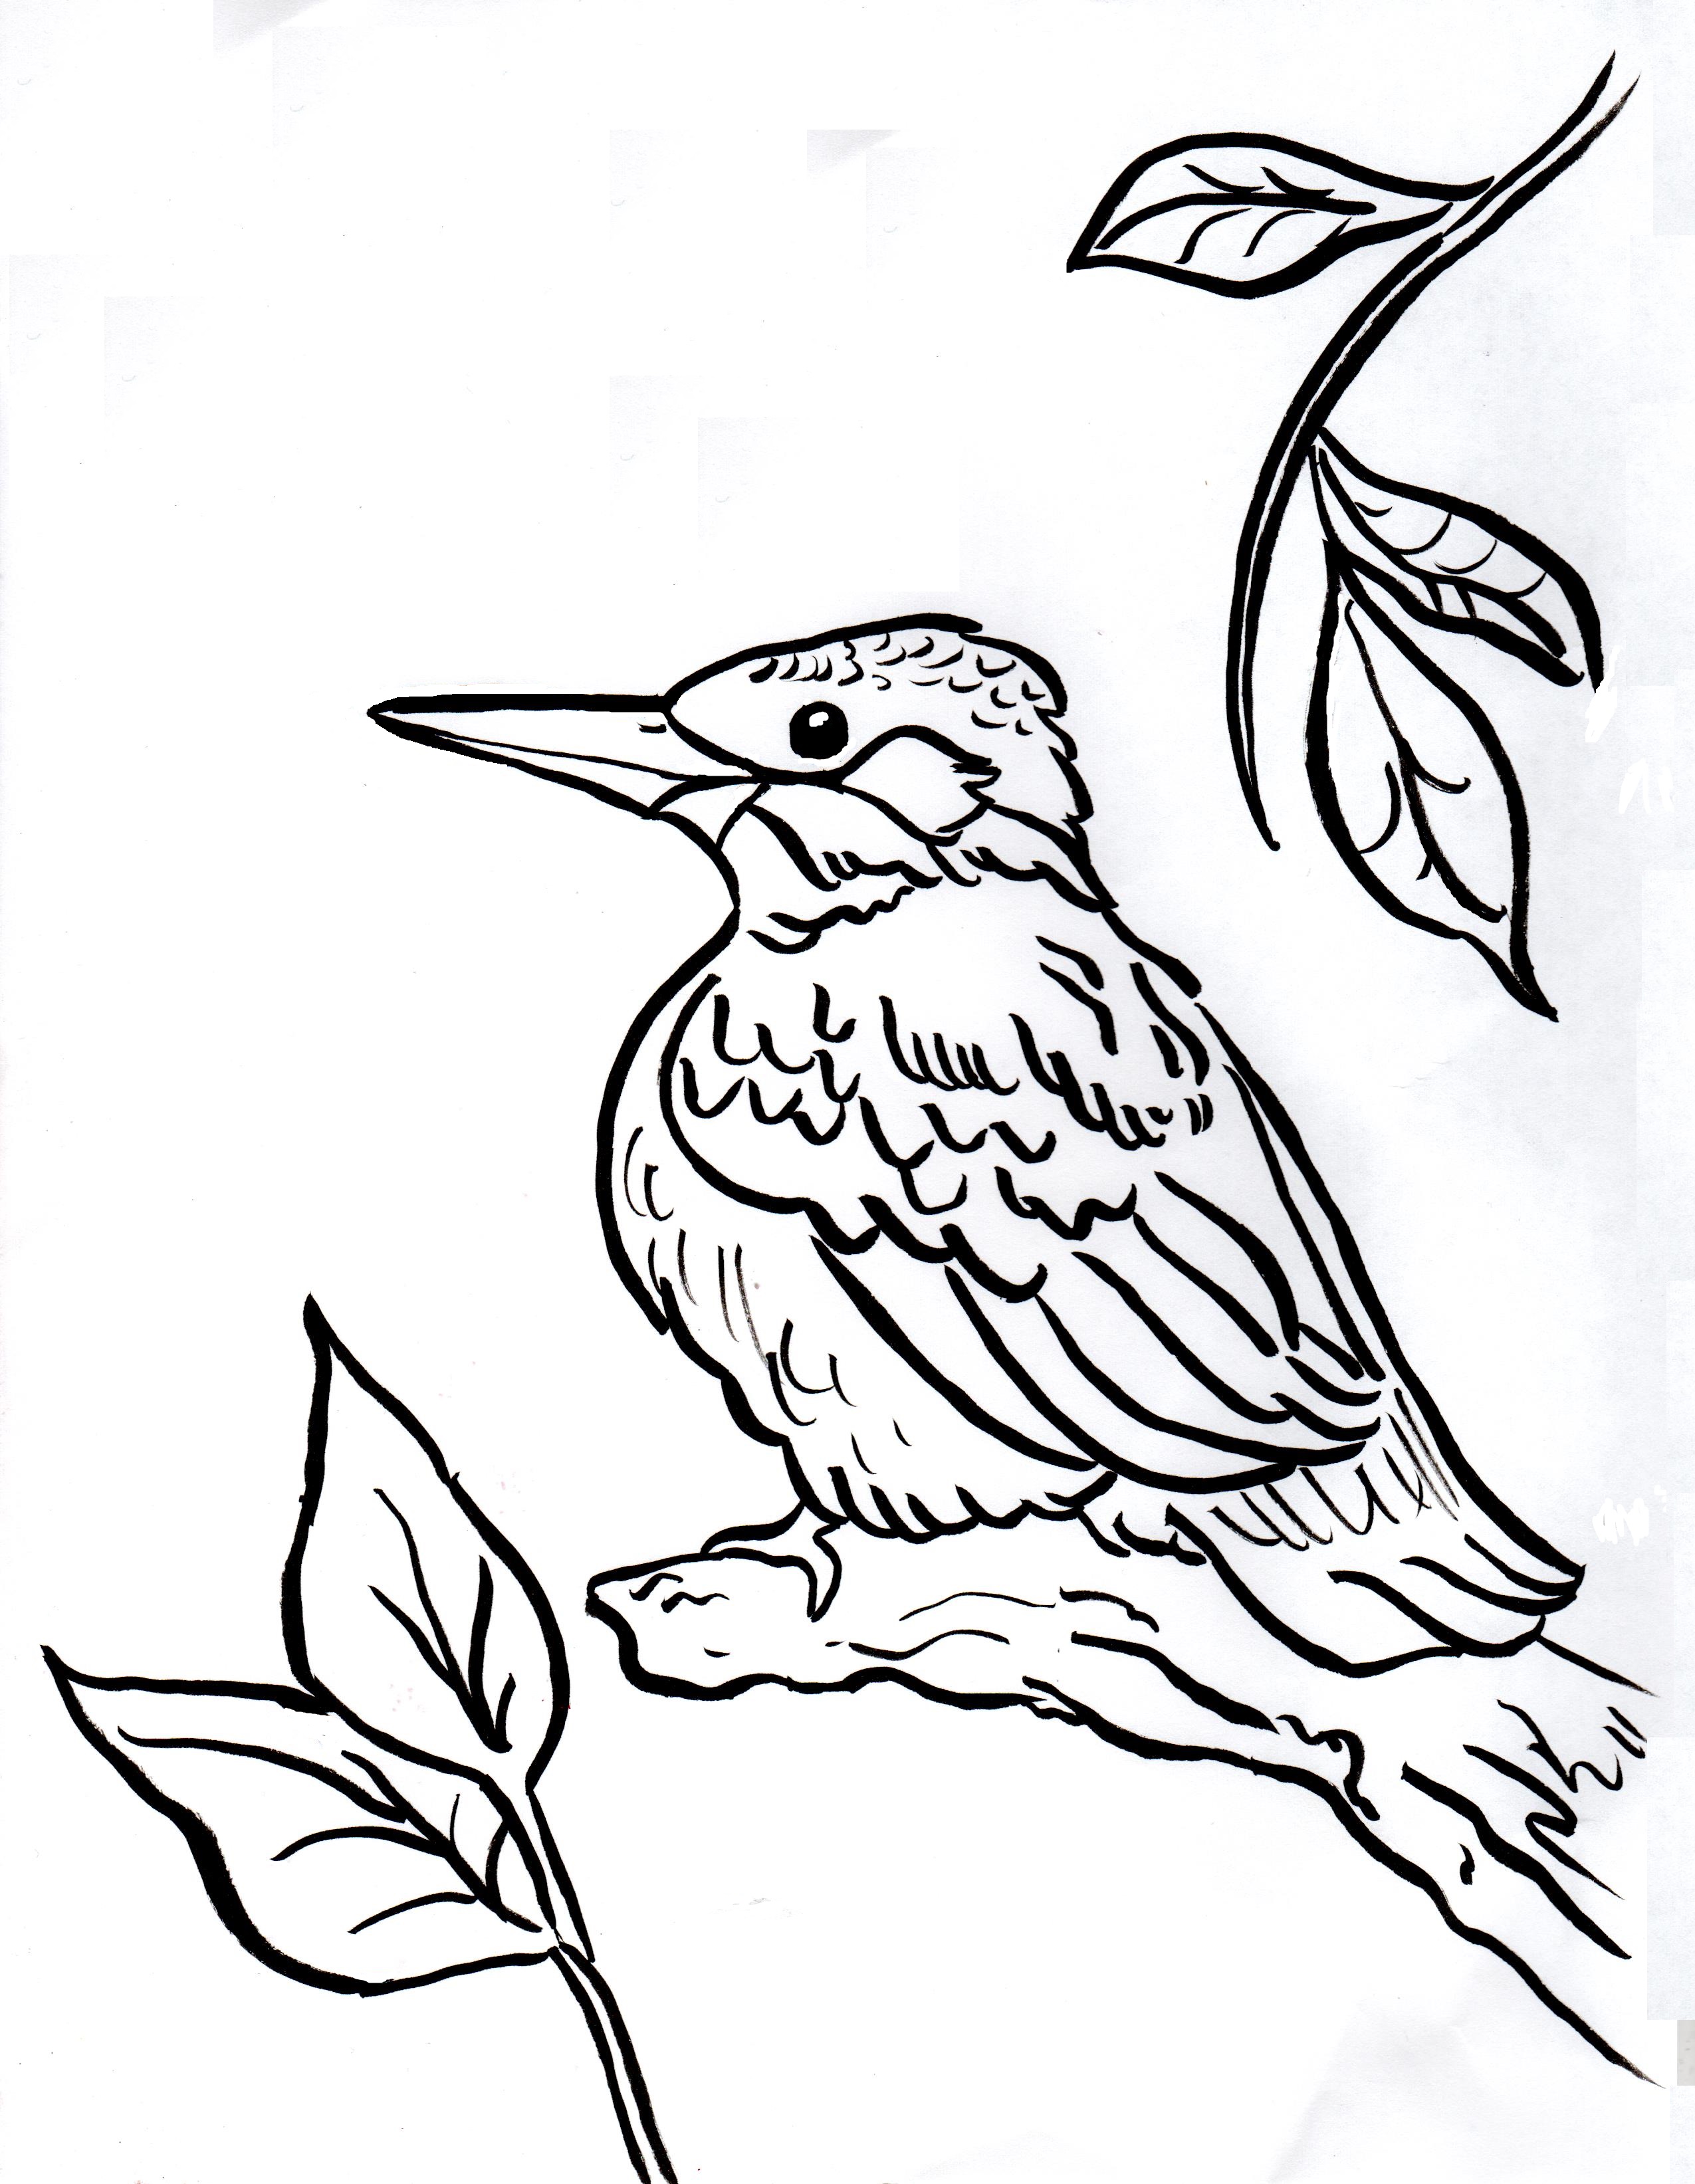 Kingfisher coloring #1, Download drawings